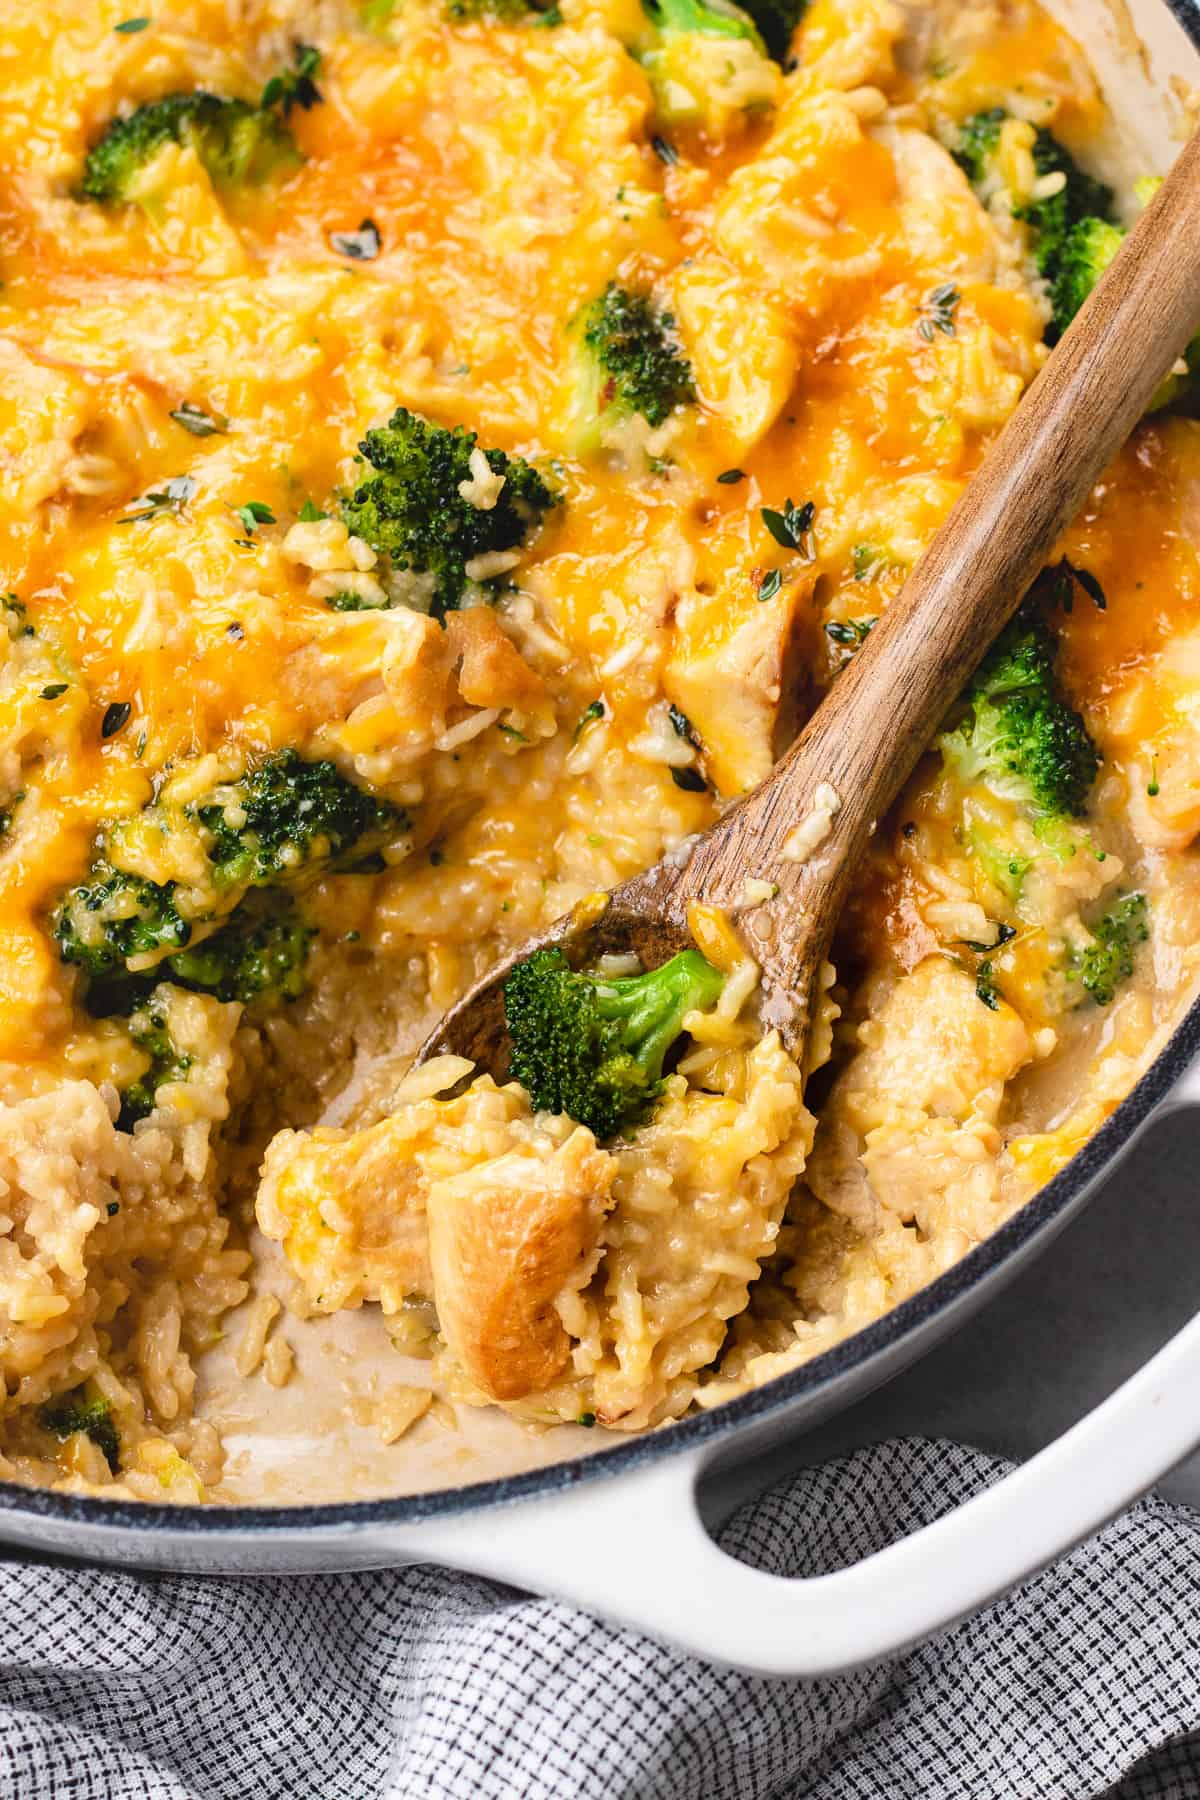 Chicken and rice with broccoli and melted cheese in a white casserole.